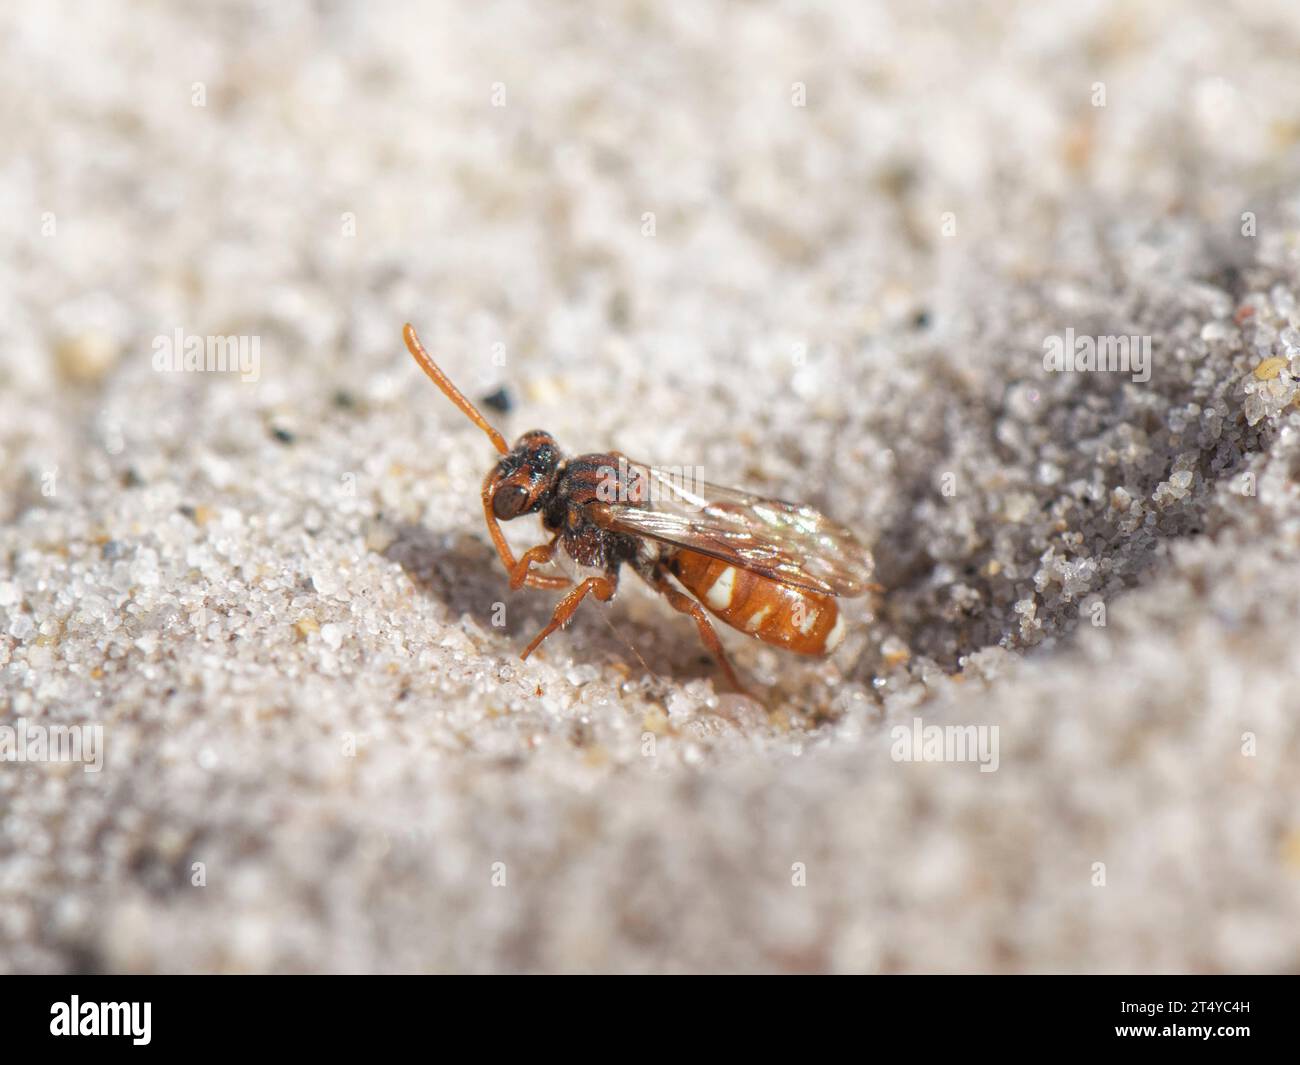 Bear-clawed nomad bee (Nomada baccata) a parasitic bee emerging from a nest burrow of its host the Small sandpit mining bee (Andrena argentata) Dorset. Stock Photo